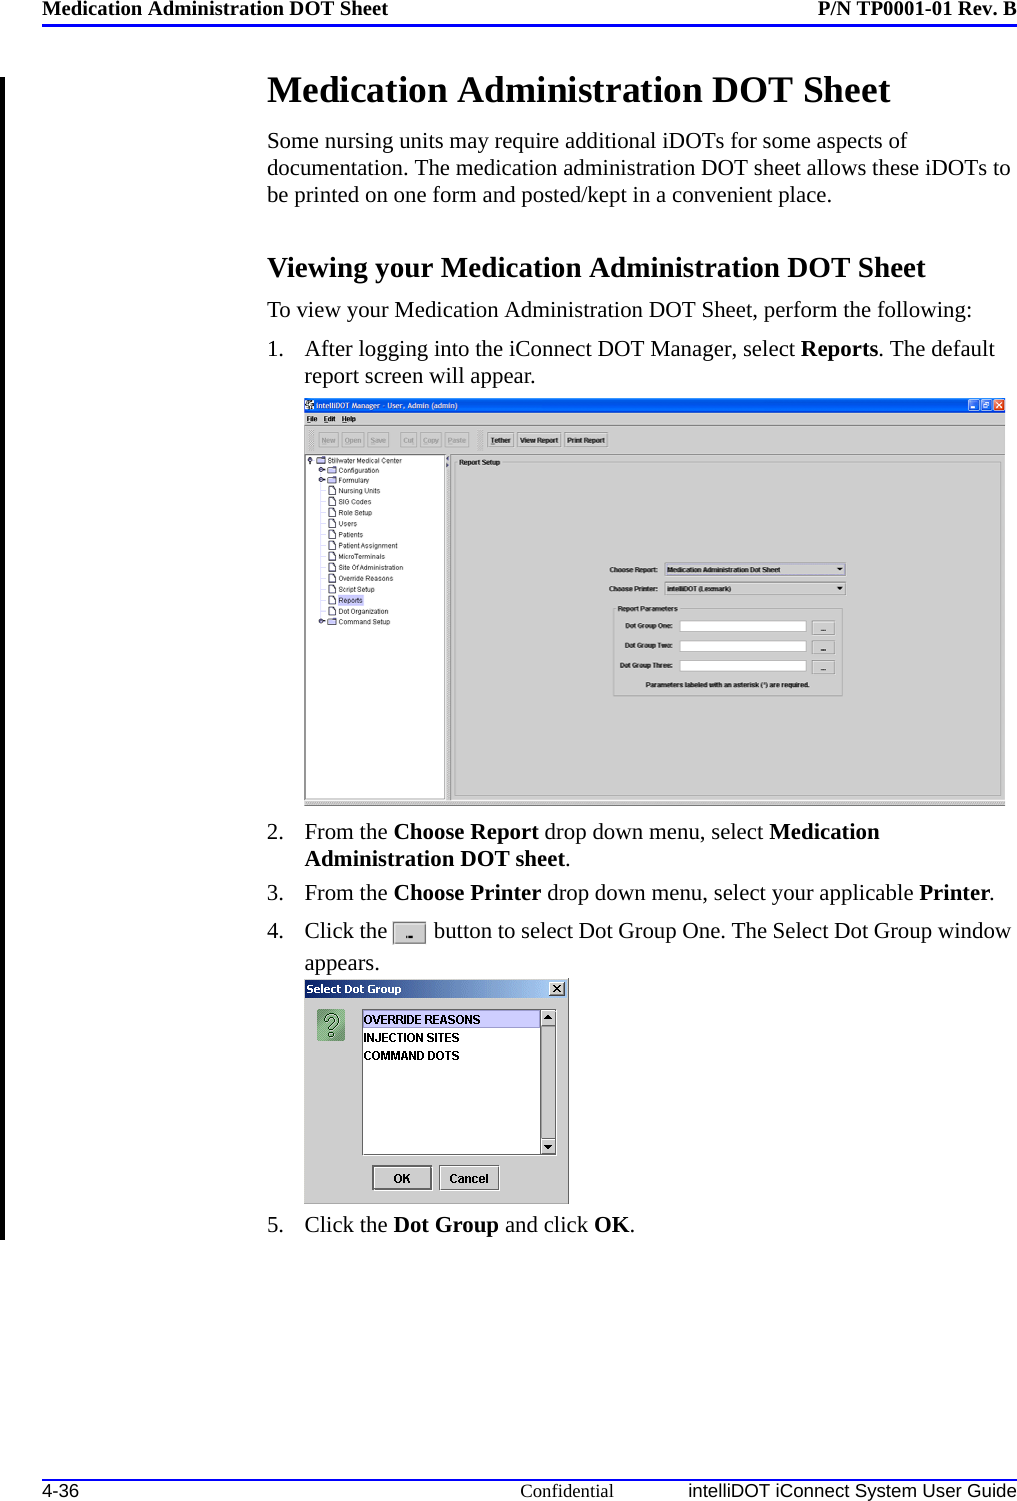 Medication Administration DOT Sheet P/N TP0001-01 Rev. B4-36 Confidential intelliDOT iConnect System User GuideMedication Administration DOT SheetSome nursing units may require additional iDOTs for some aspects of documentation. The medication administration DOT sheet allows these iDOTs to be printed on one form and posted/kept in a convenient place.Viewing your Medication Administration DOT Sheet To view your Medication Administration DOT Sheet, perform the following:1. After logging into the iConnect DOT Manager, select Reports. The default report screen will appear.2. From the Choose Report drop down menu, select Medication Administration DOT sheet.3. From the Choose Printer drop down menu, select your applicable Printer.4. Click the  button to select Dot Group One. The Select Dot Group window appears.5. Click the Dot Group and click OK.